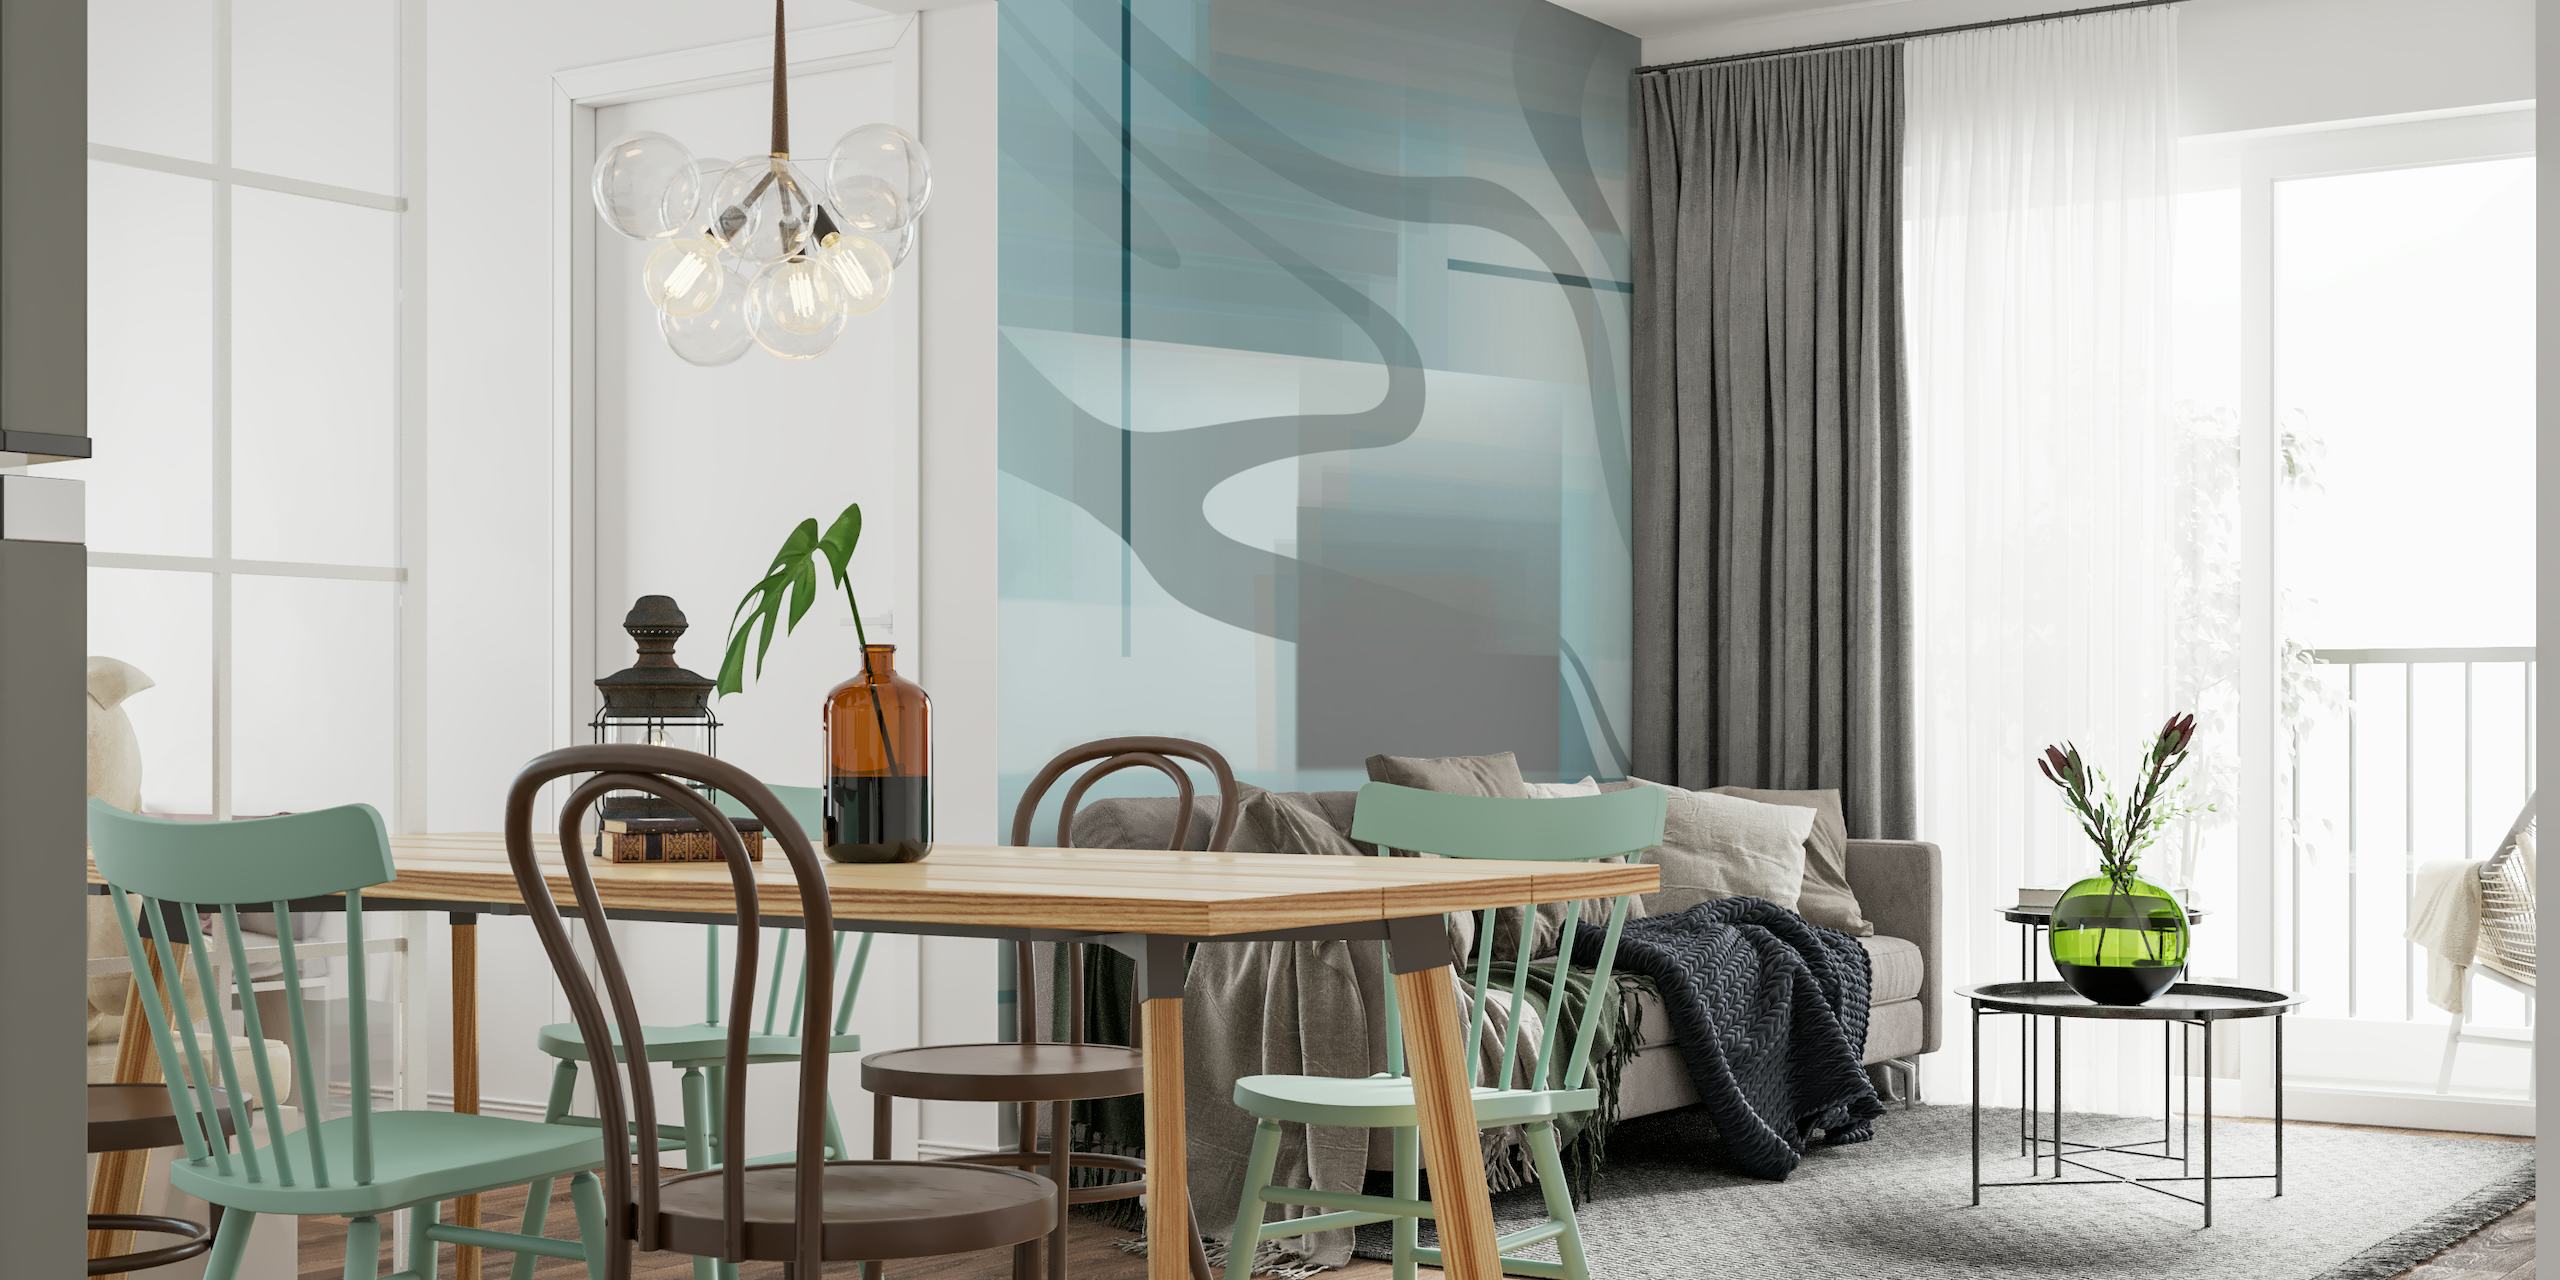 Mid-Century Modern style wall mural with a soft blue and gray abstract pattern